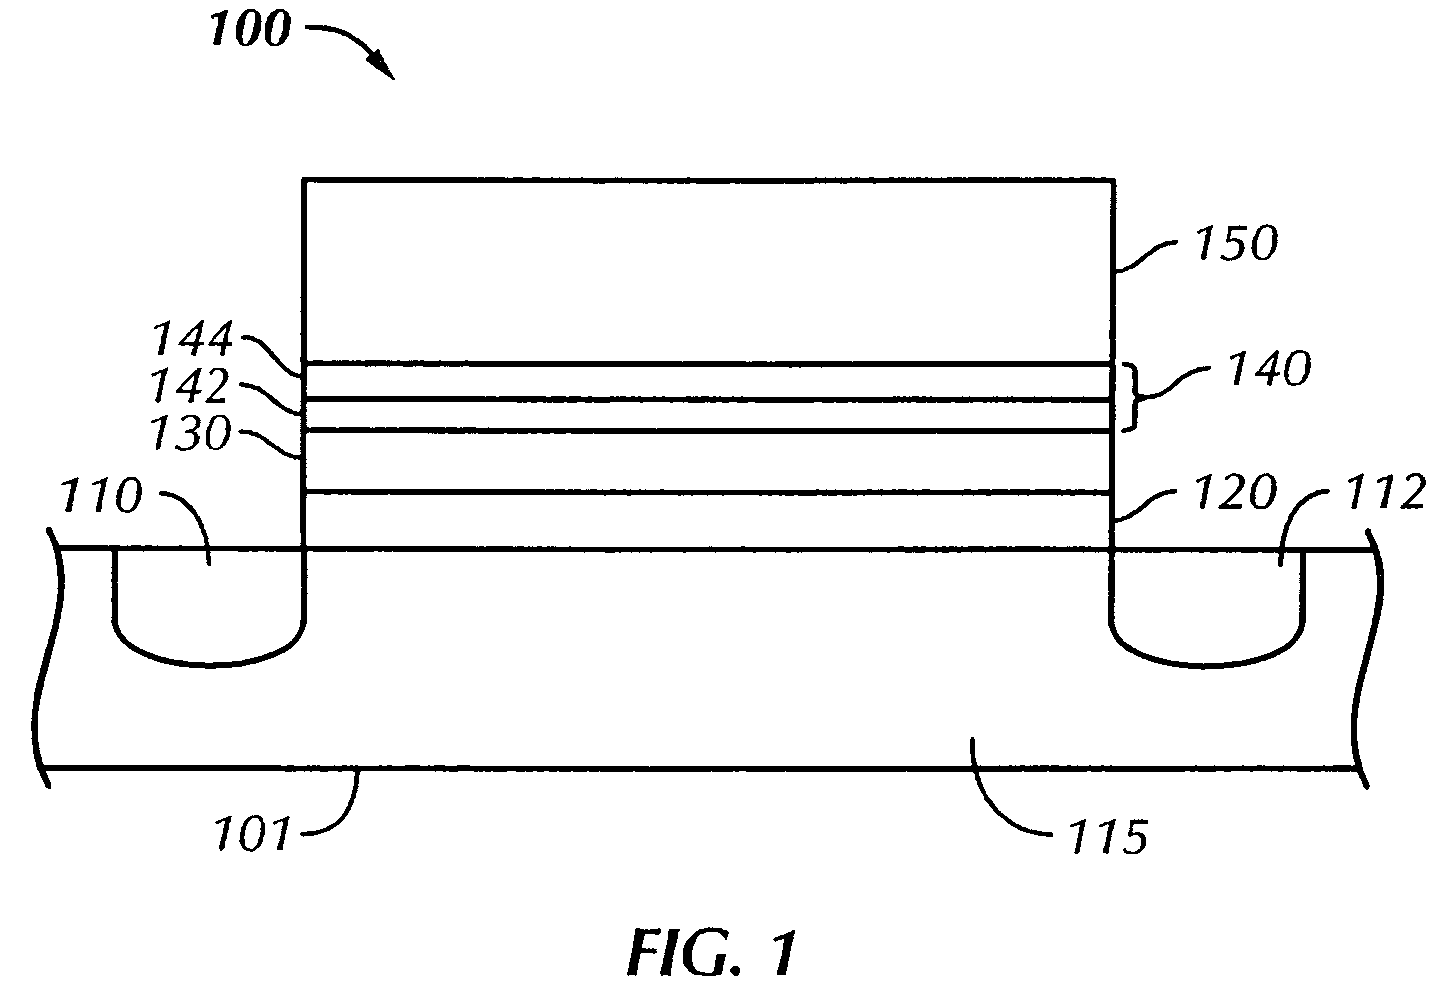 Methods of operating non-volatile memory cells having an oxide/nitride multilayer insulating structure